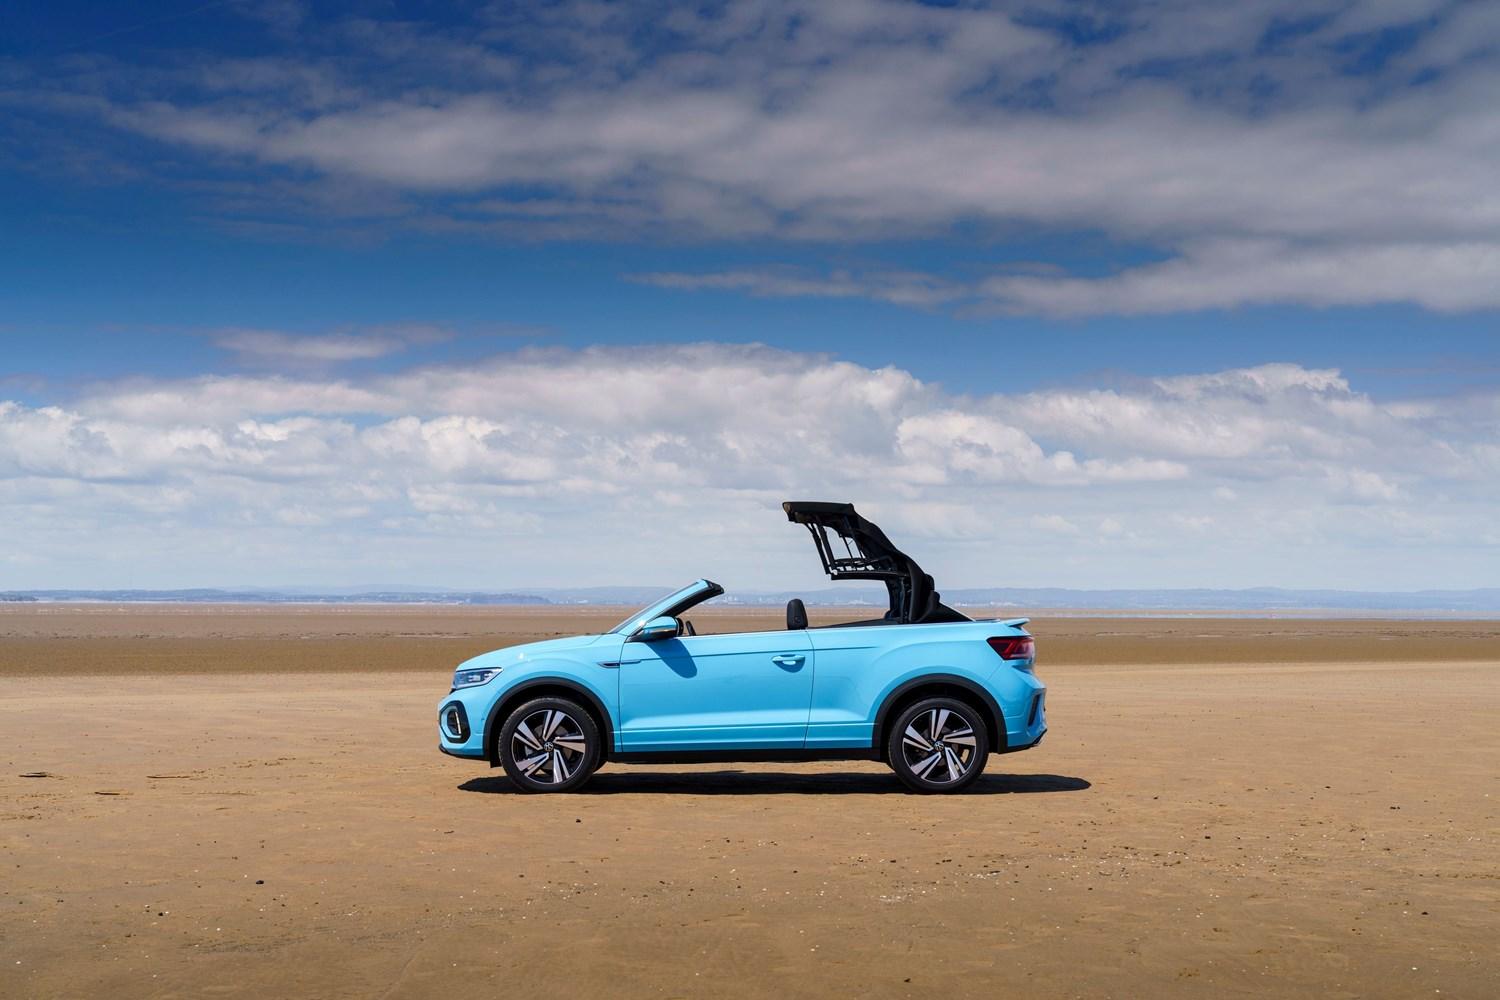 Side view of the new Volkswagen T-Roc Cabriolet in blue, parked on beach with sunroof going down